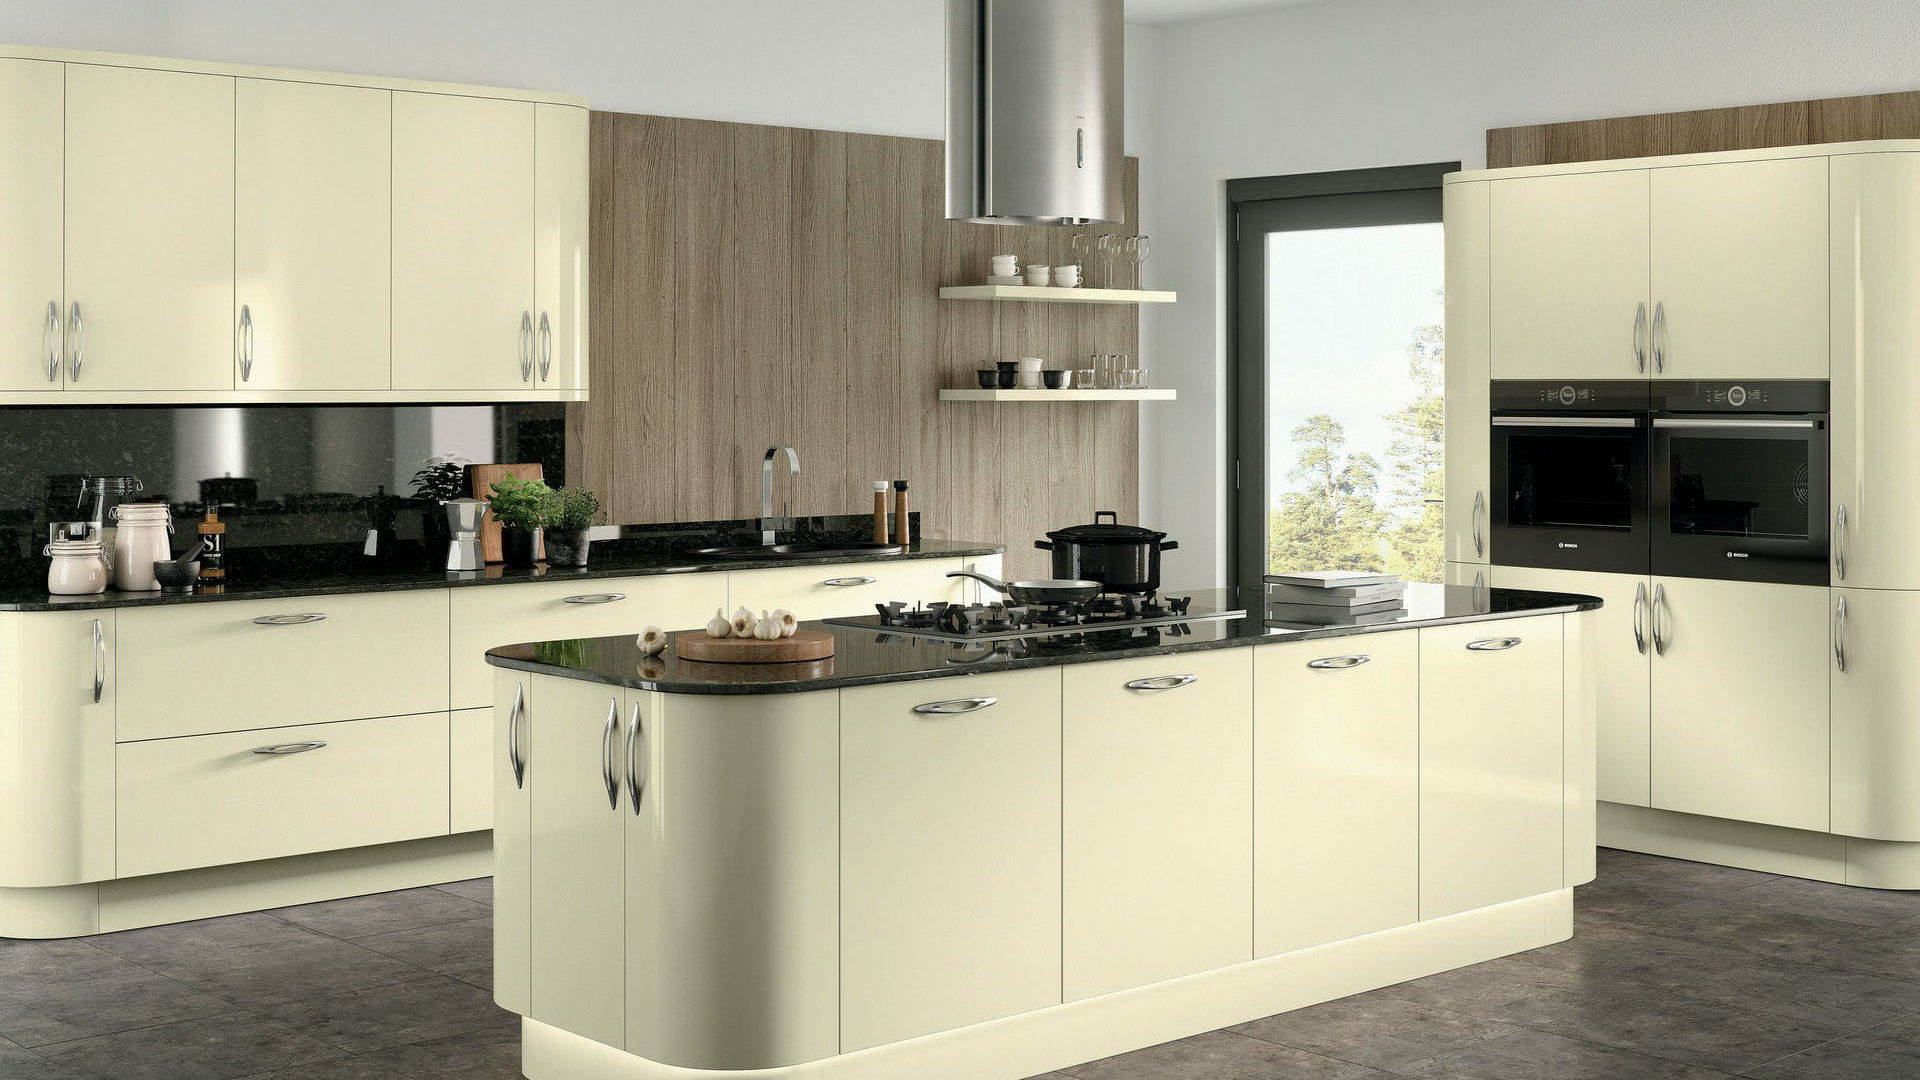 High gloss ivory kitchen surfaces reflecting light beautifully, ideal for creating a bright and inviting kitchen space